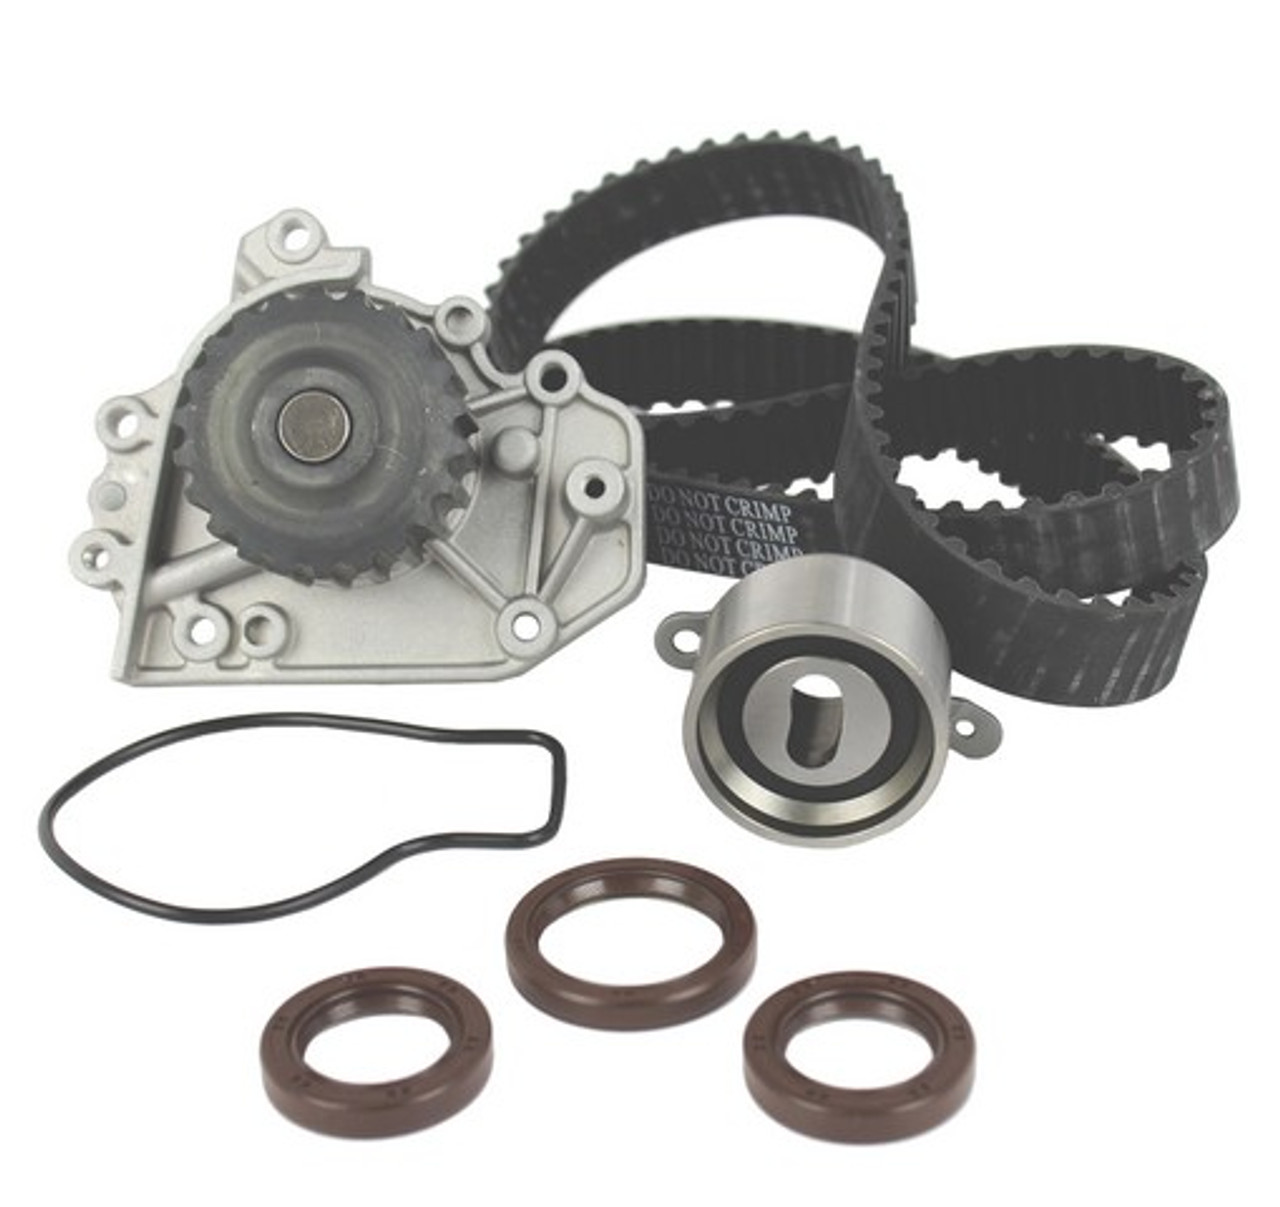 Timing Belt Kit with Water Pump 1.7L 1993 Acura Integra - TBK217WP.2